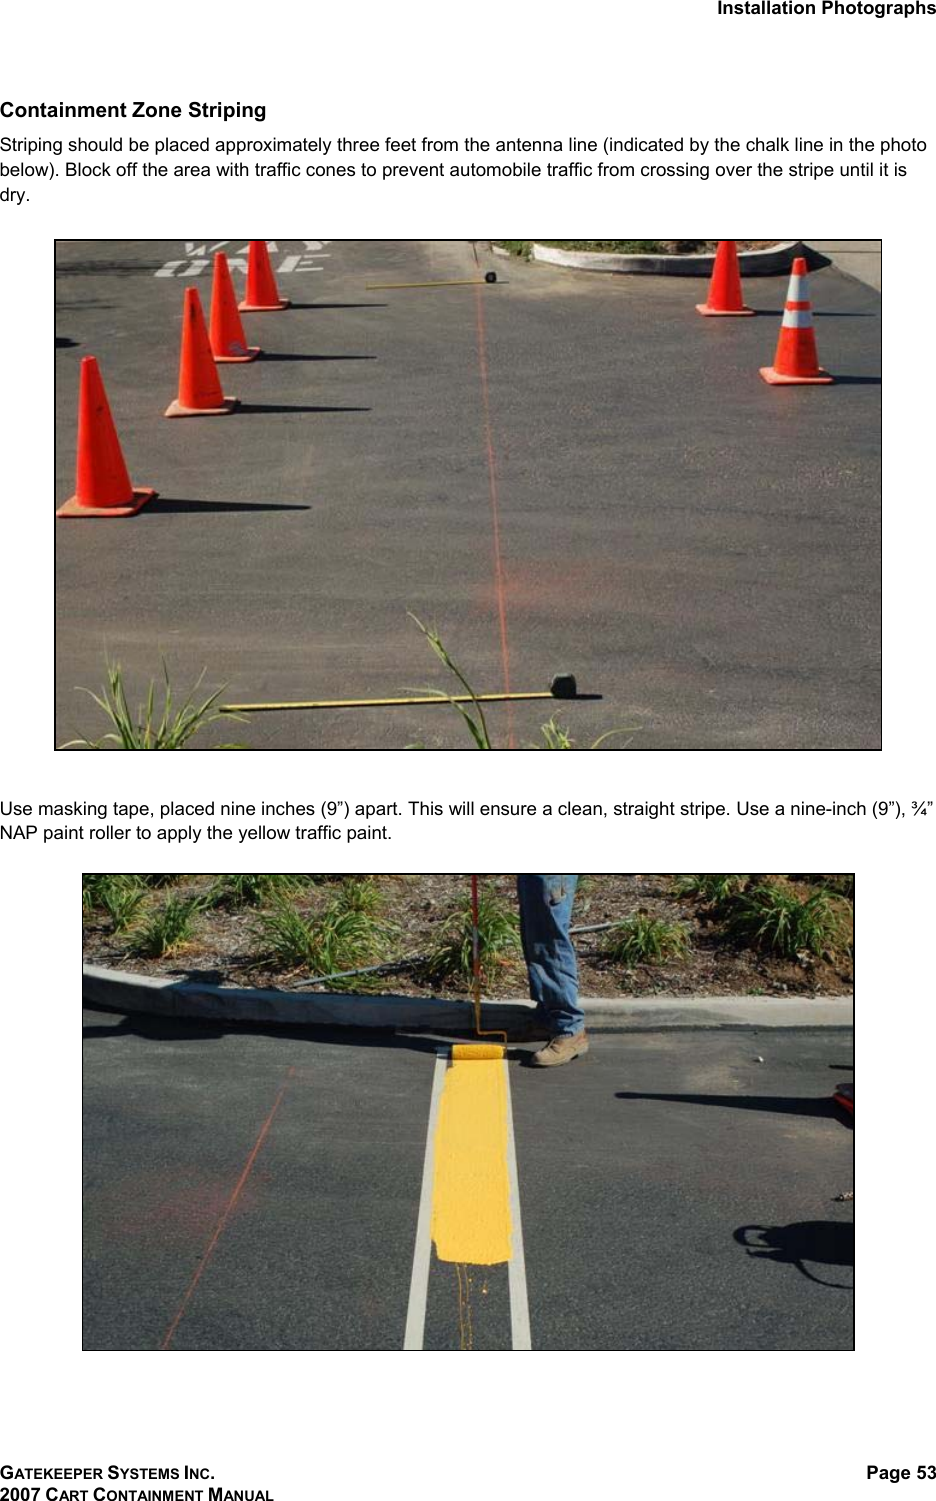 Installation Photographs GATEKEEPER SYSTEMS INC. 2007 CART CONTAINMENT MANUAL Page 53  Containment Zone Striping  Striping should be placed approximately three feet from the antenna line (indicated by the chalk line in the photo below). Block off the area with traffic cones to prevent automobile traffic from crossing over the stripe until it is dry.     Use masking tape, placed nine inches (9”) apart. This will ensure a clean, straight stripe. Use a nine-inch (9”), ¾” NAP paint roller to apply the yellow traffic paint.   